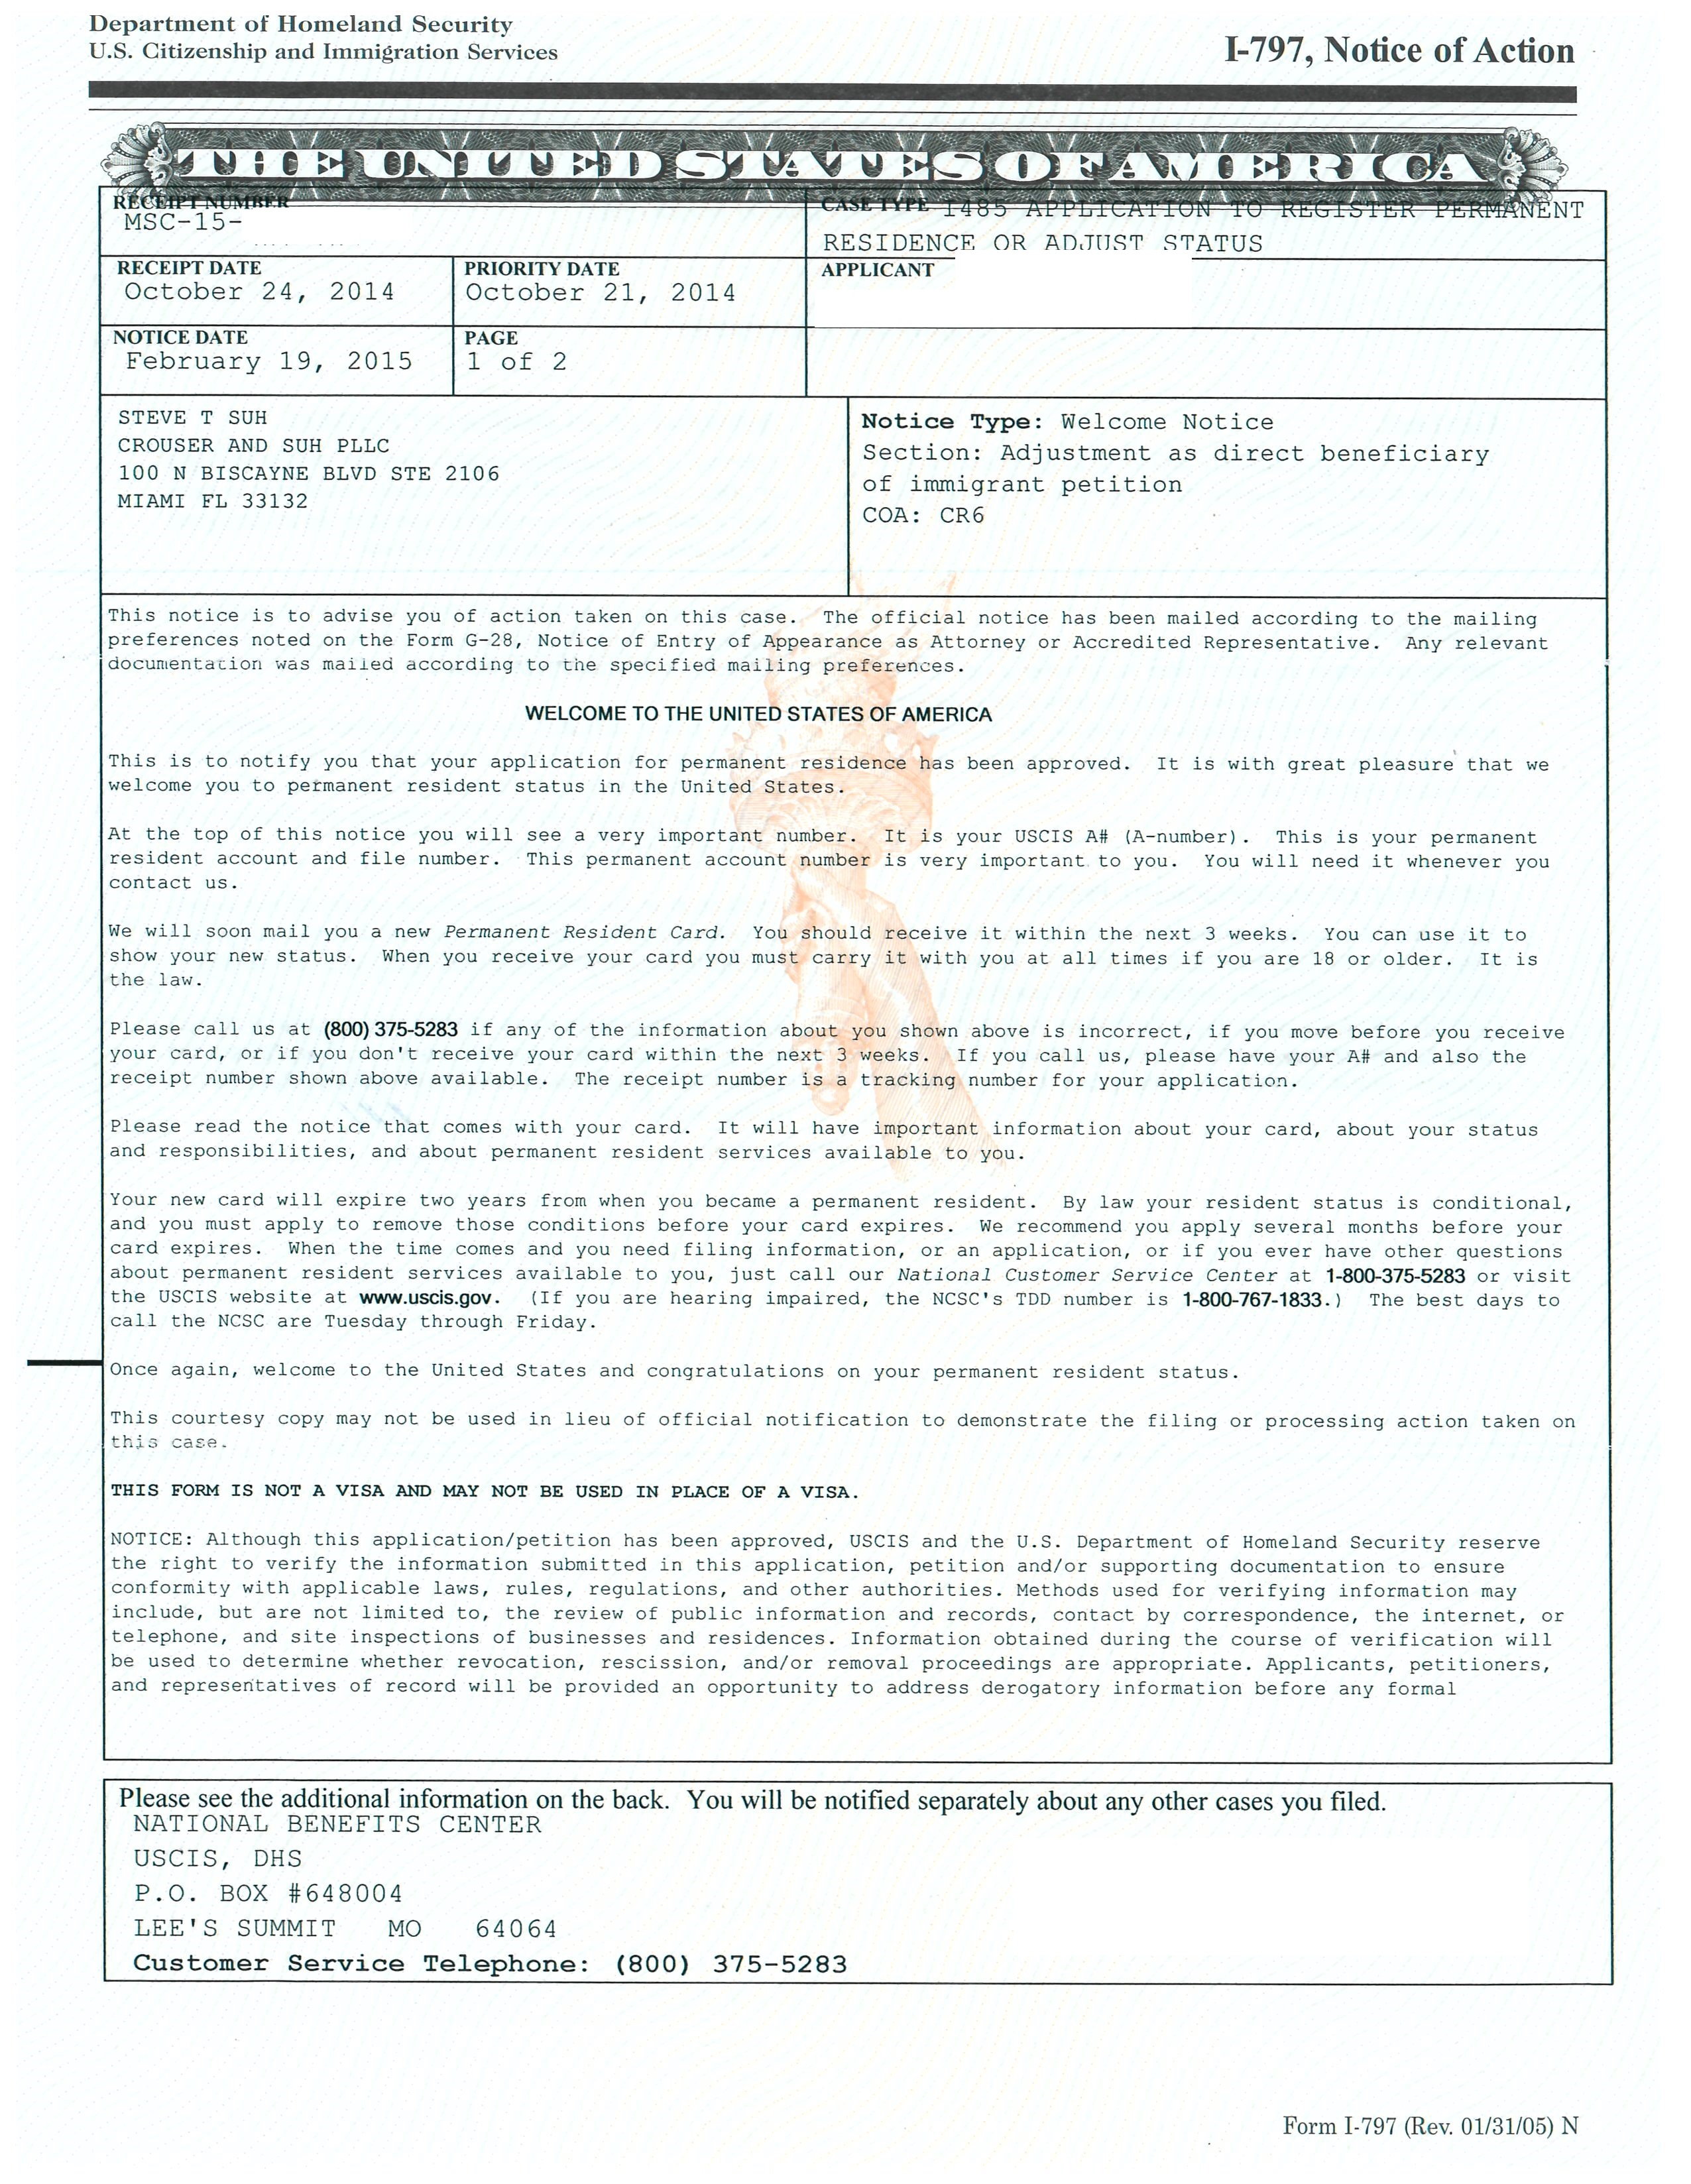 marriagepetitionapprovalnotice02192015.jpg